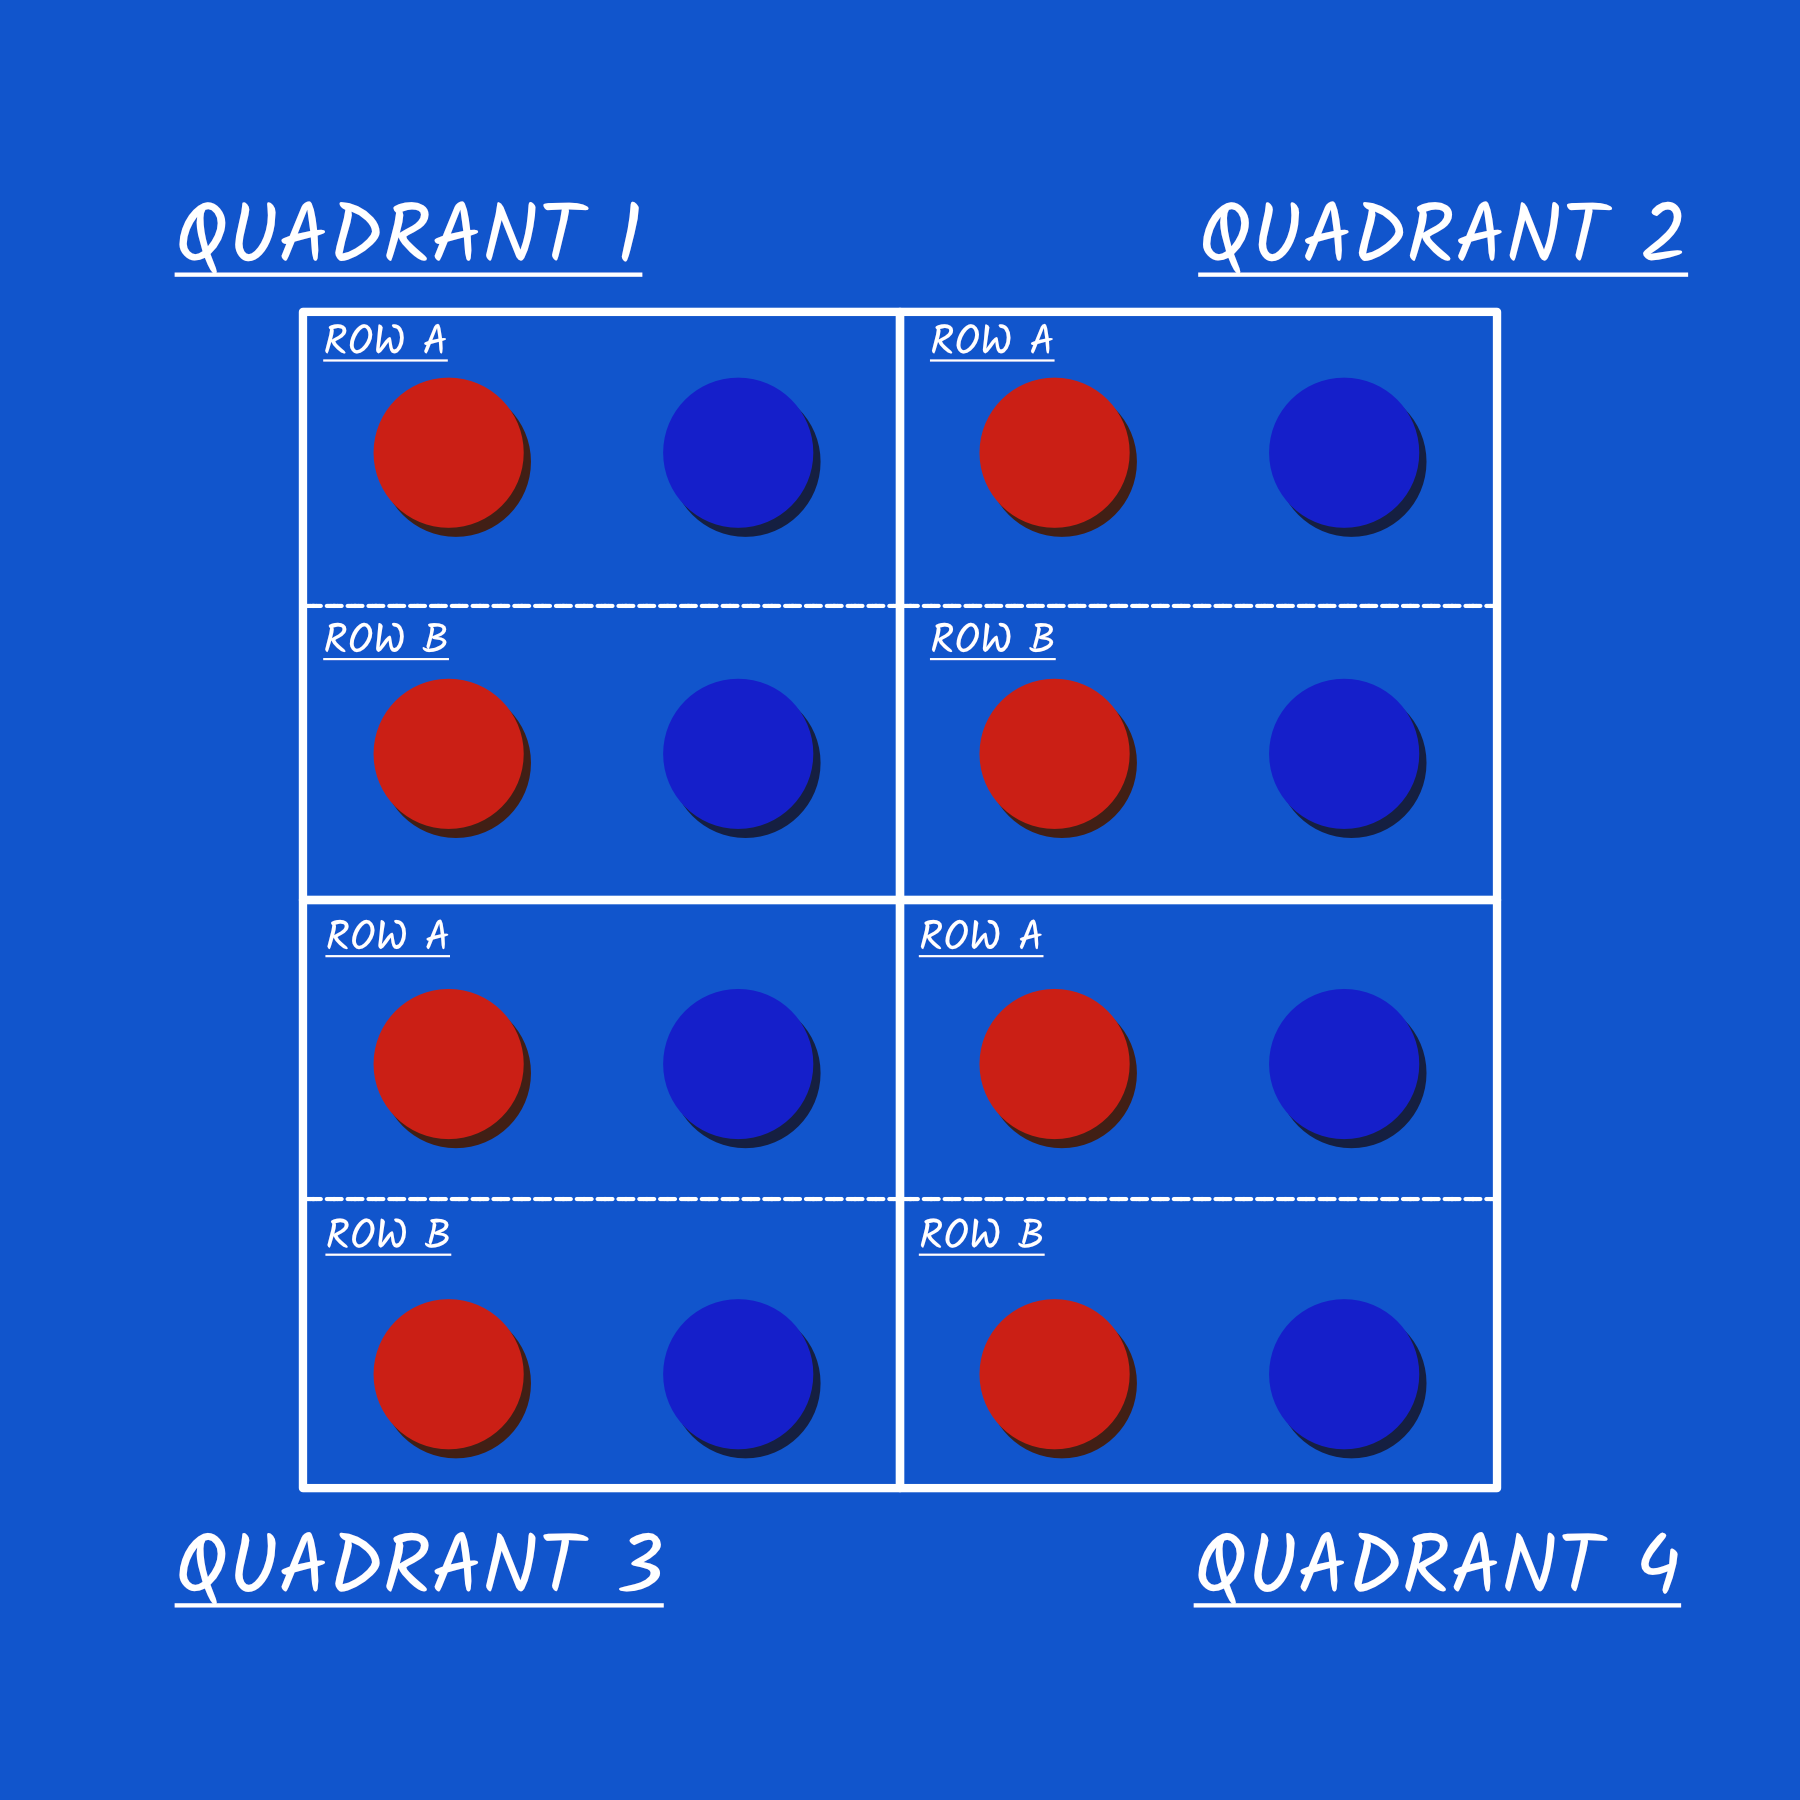 A grid of red and blue buttons on a blue background